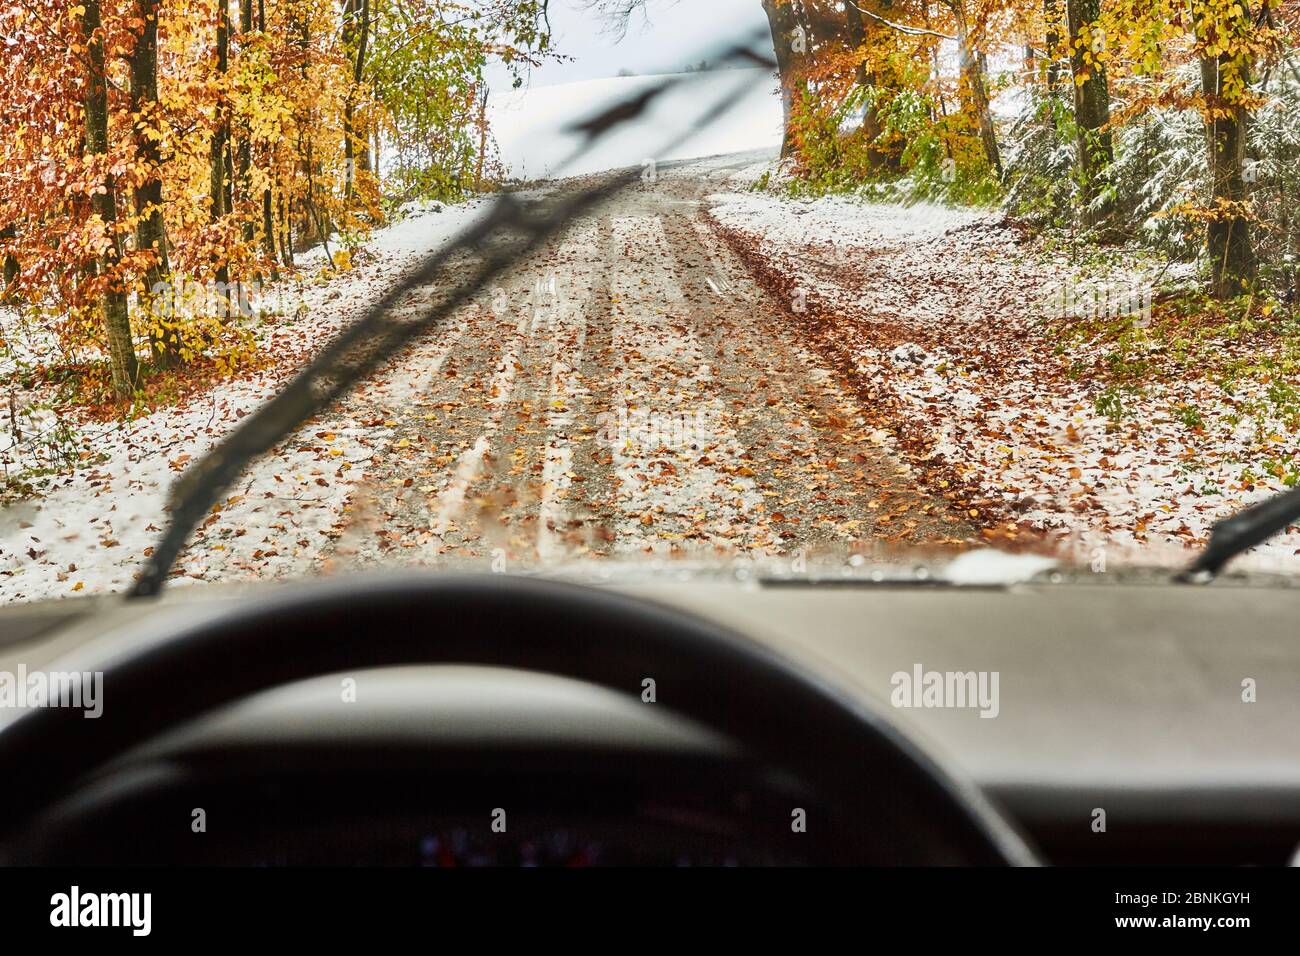 Country road, leaves, ice, snow, forest, driver's perspective, steering wheel, wipers, Stock Photo